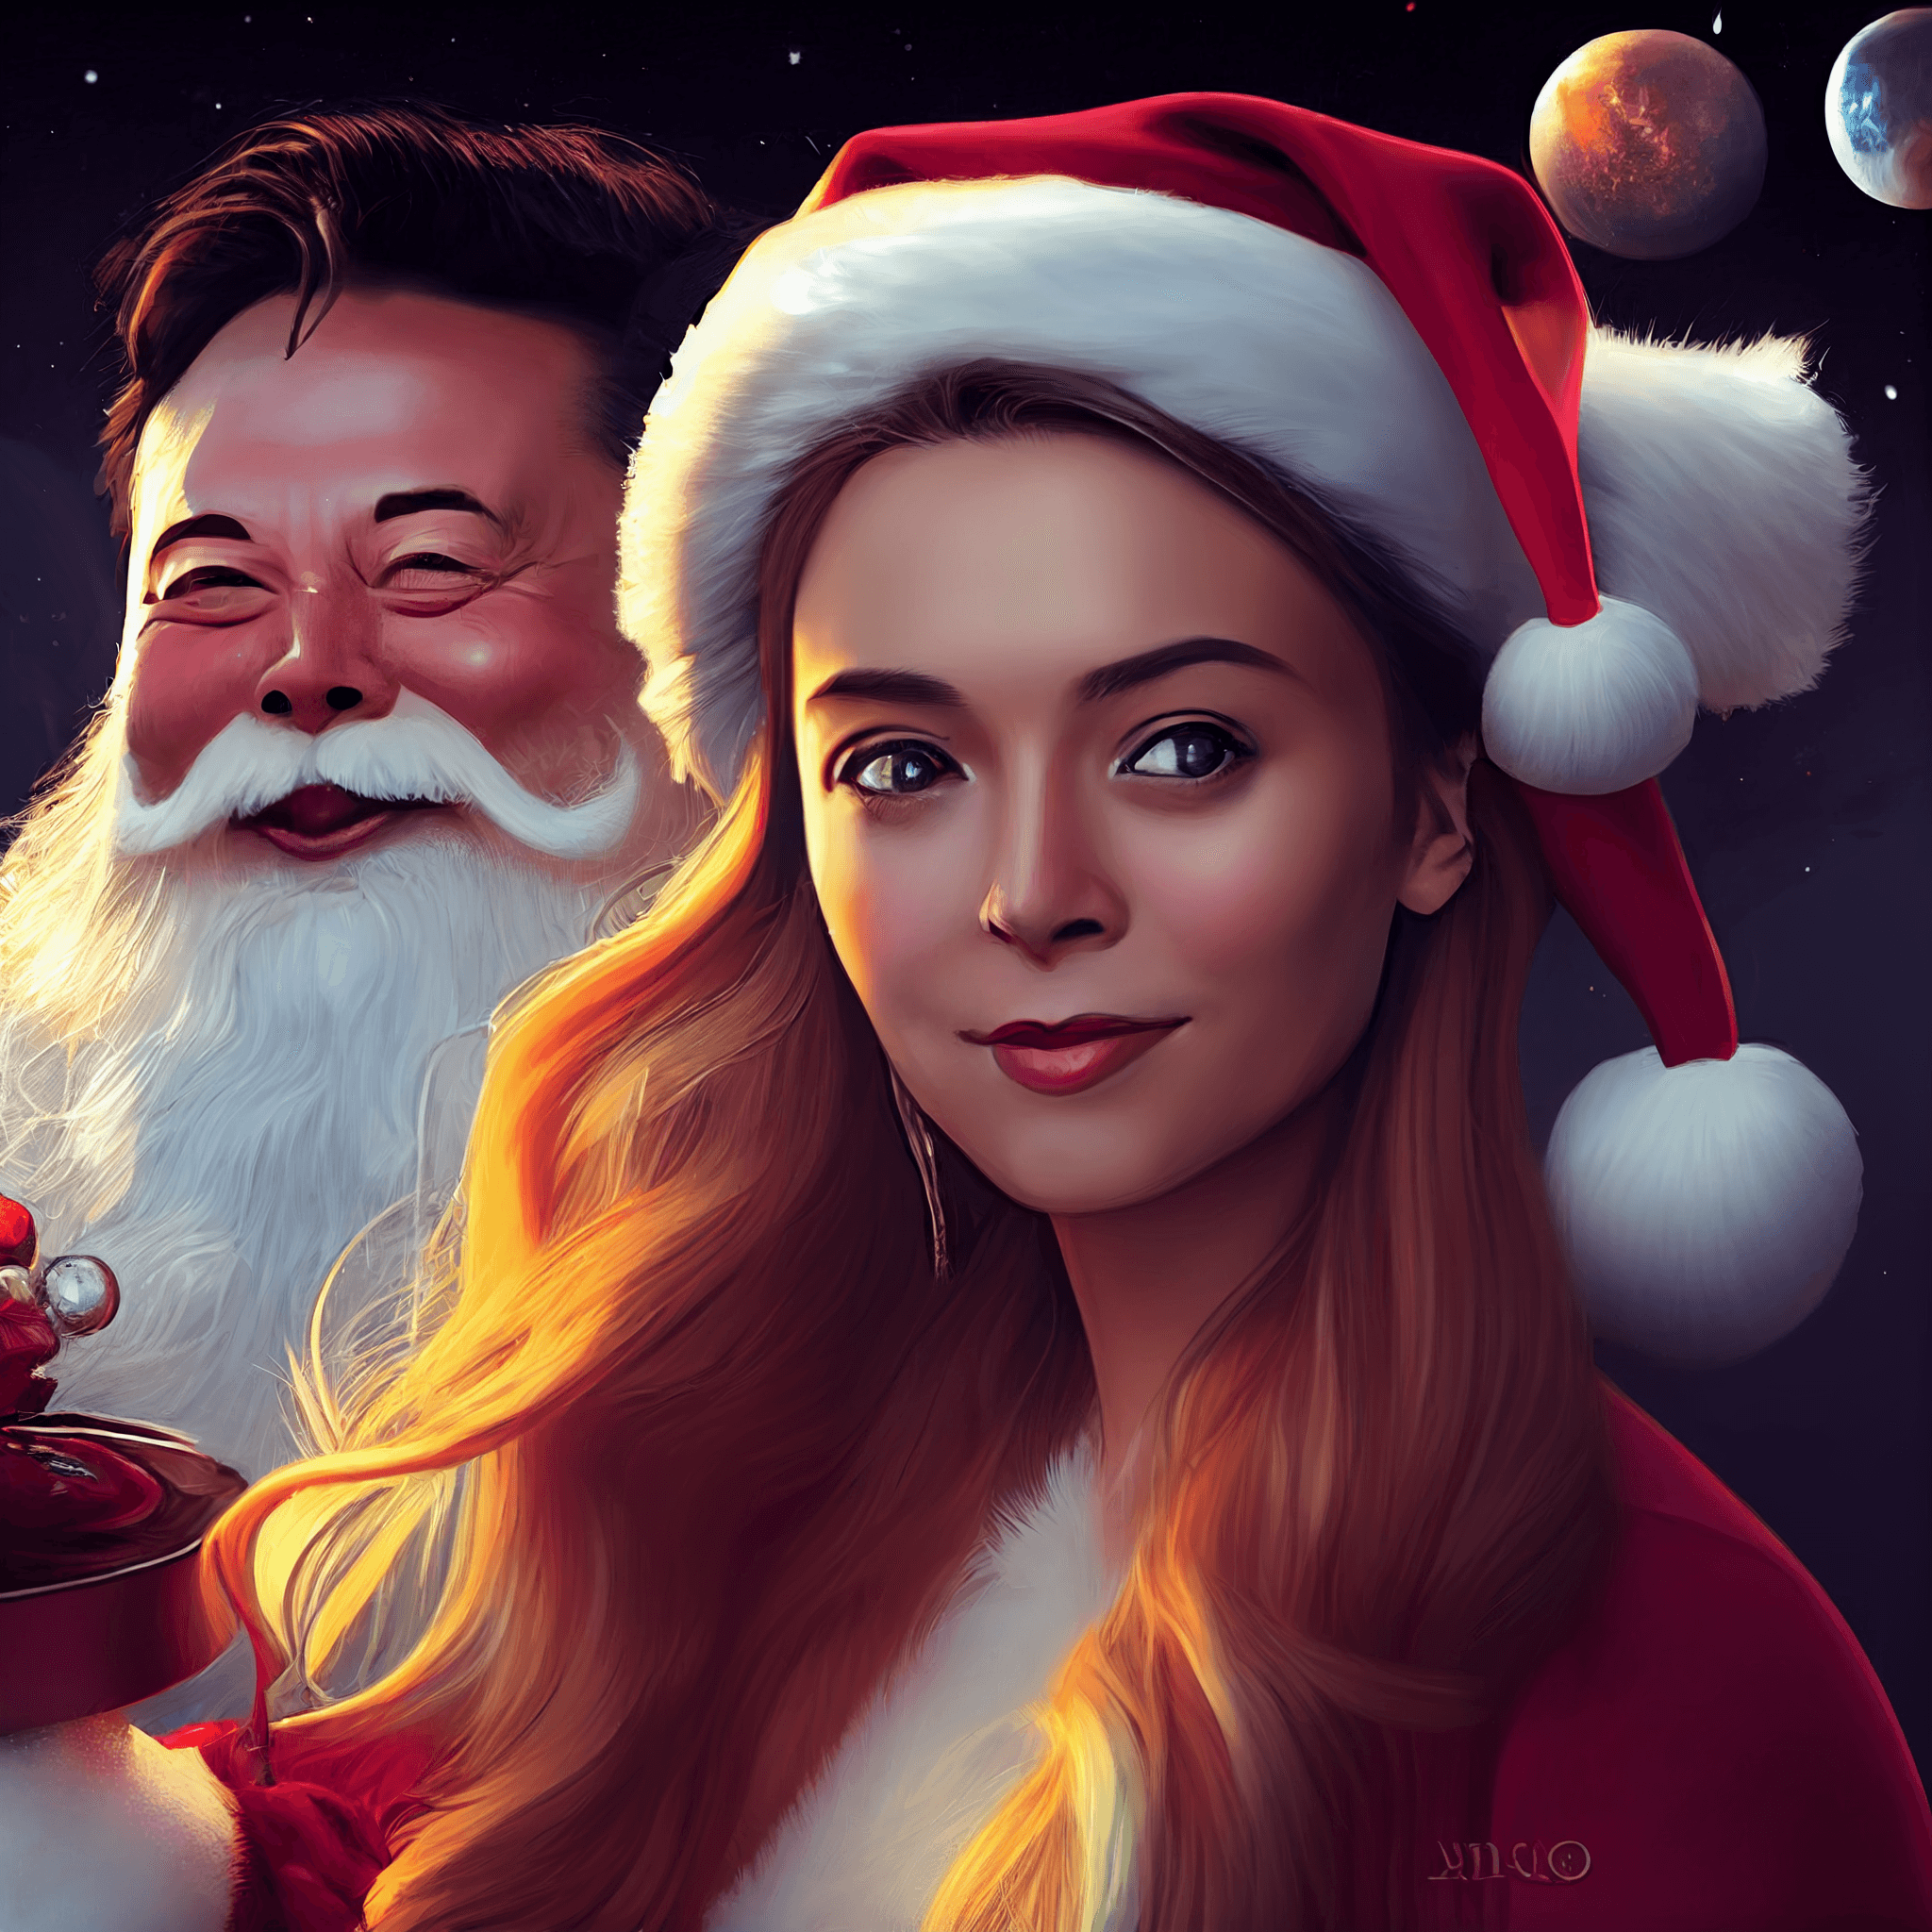 🎅 💃 Beauty Queen with Santa Claus 💃 🎅